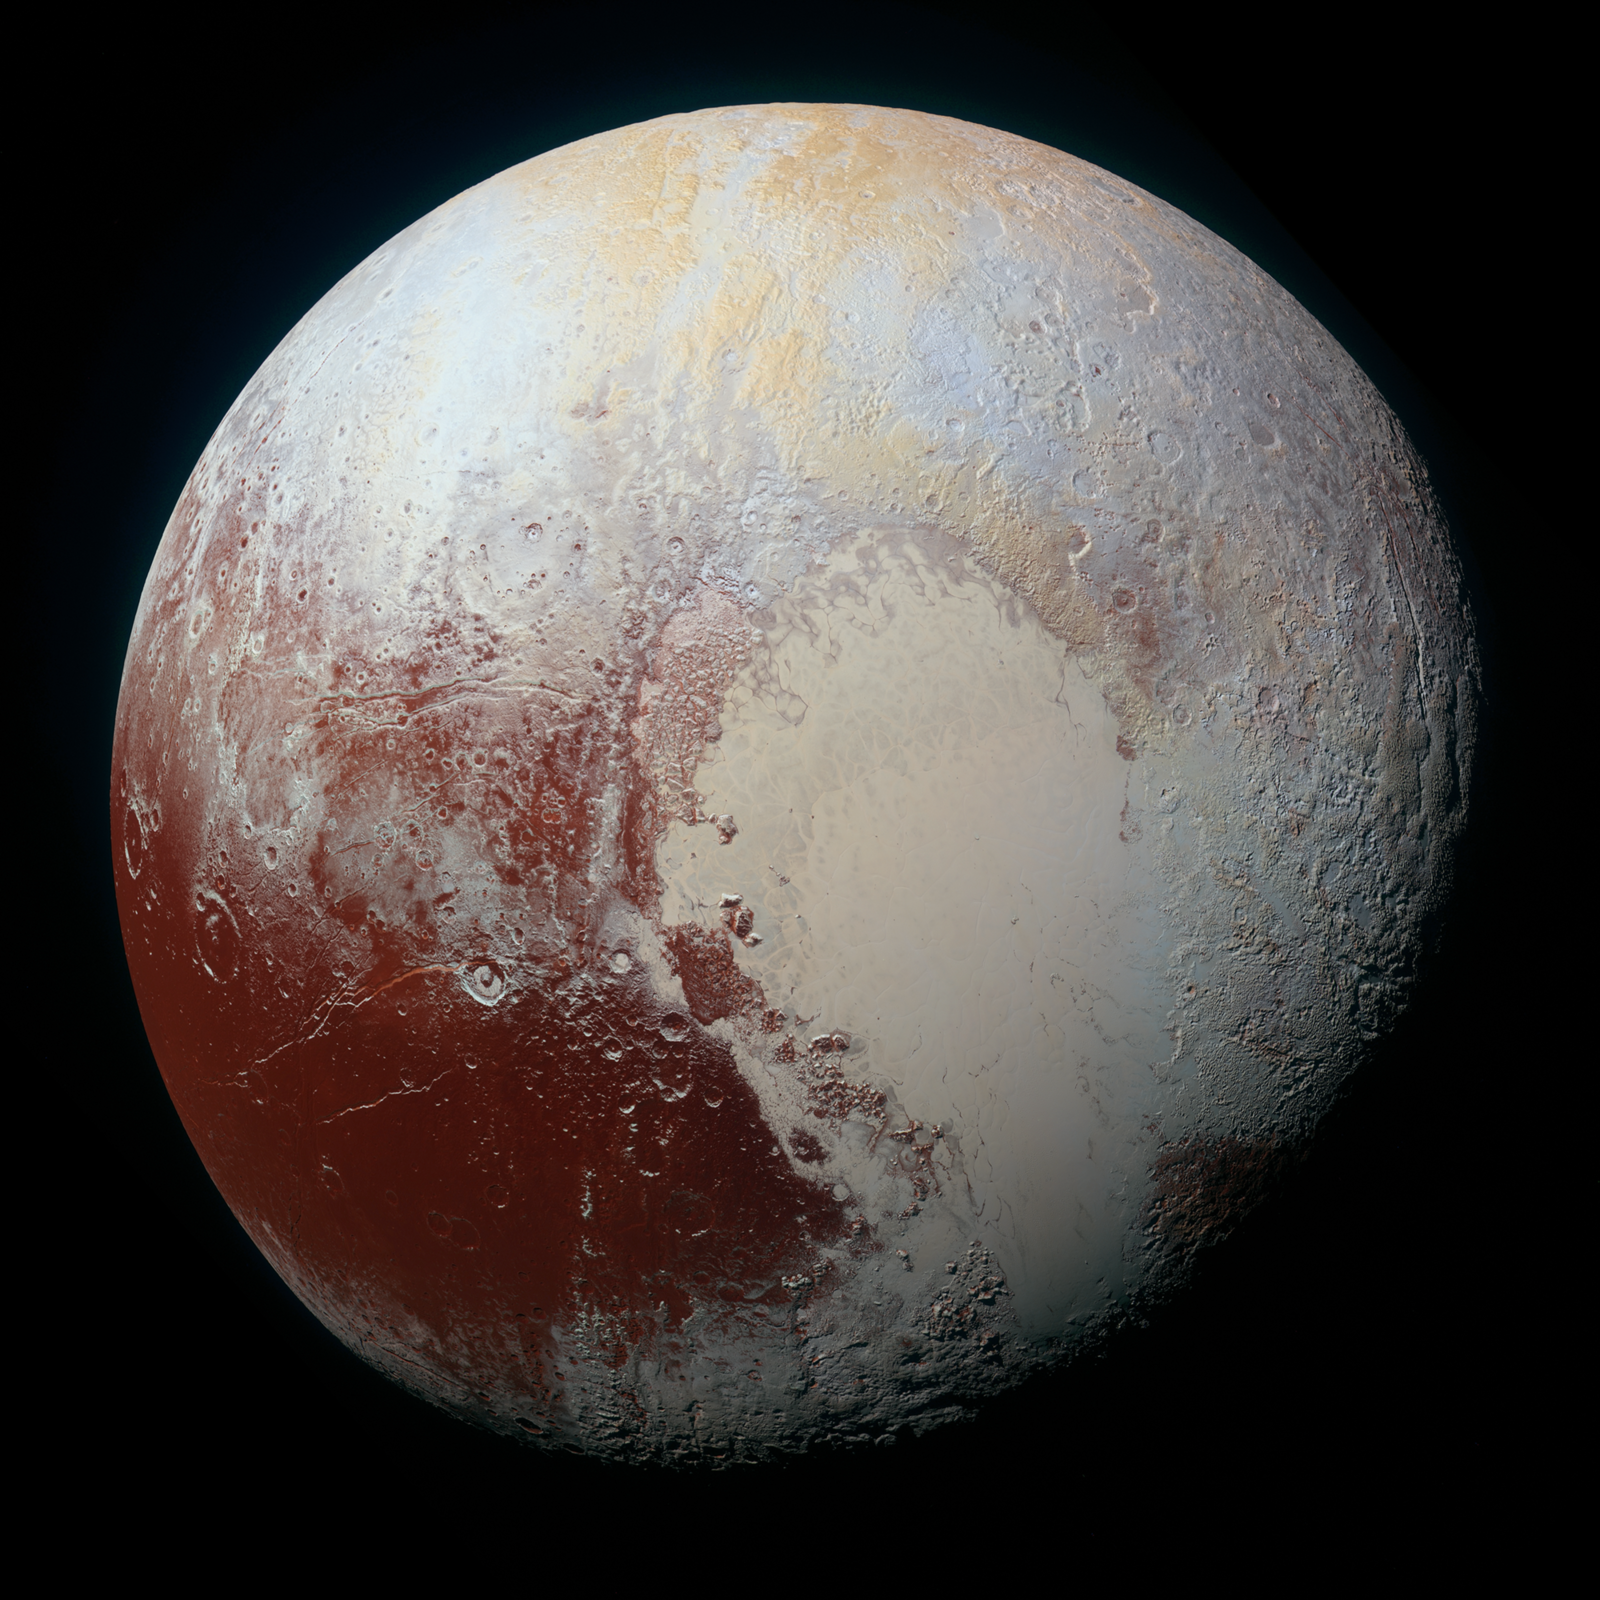 Pluton vu par la sonde spatiale New horizons le 14 juillet 2015 - doc.NASA / Johns Hopkins University Applied Physics Laboratory / Southwest Research Institute - PLUTO - NEW HORIZONS - July 14, 2015 ORIGINAL IMAGE DESCRIPTION: Four images from New Horizons’ Long Range Reconnaissance Imager (LORRI) were combined with color data from the Ralph instrument to create this global view of Pluto. (The lower right edge of Pluto in this view currently lacks high-resolution color coverage.) The images, taken when the spacecraft was 280,000 miles (450,000 kilometers) away, show features as small as 1.4 miles (2.2 kilometers), twice the resolution of the single-image view taken on July 13 [2015].